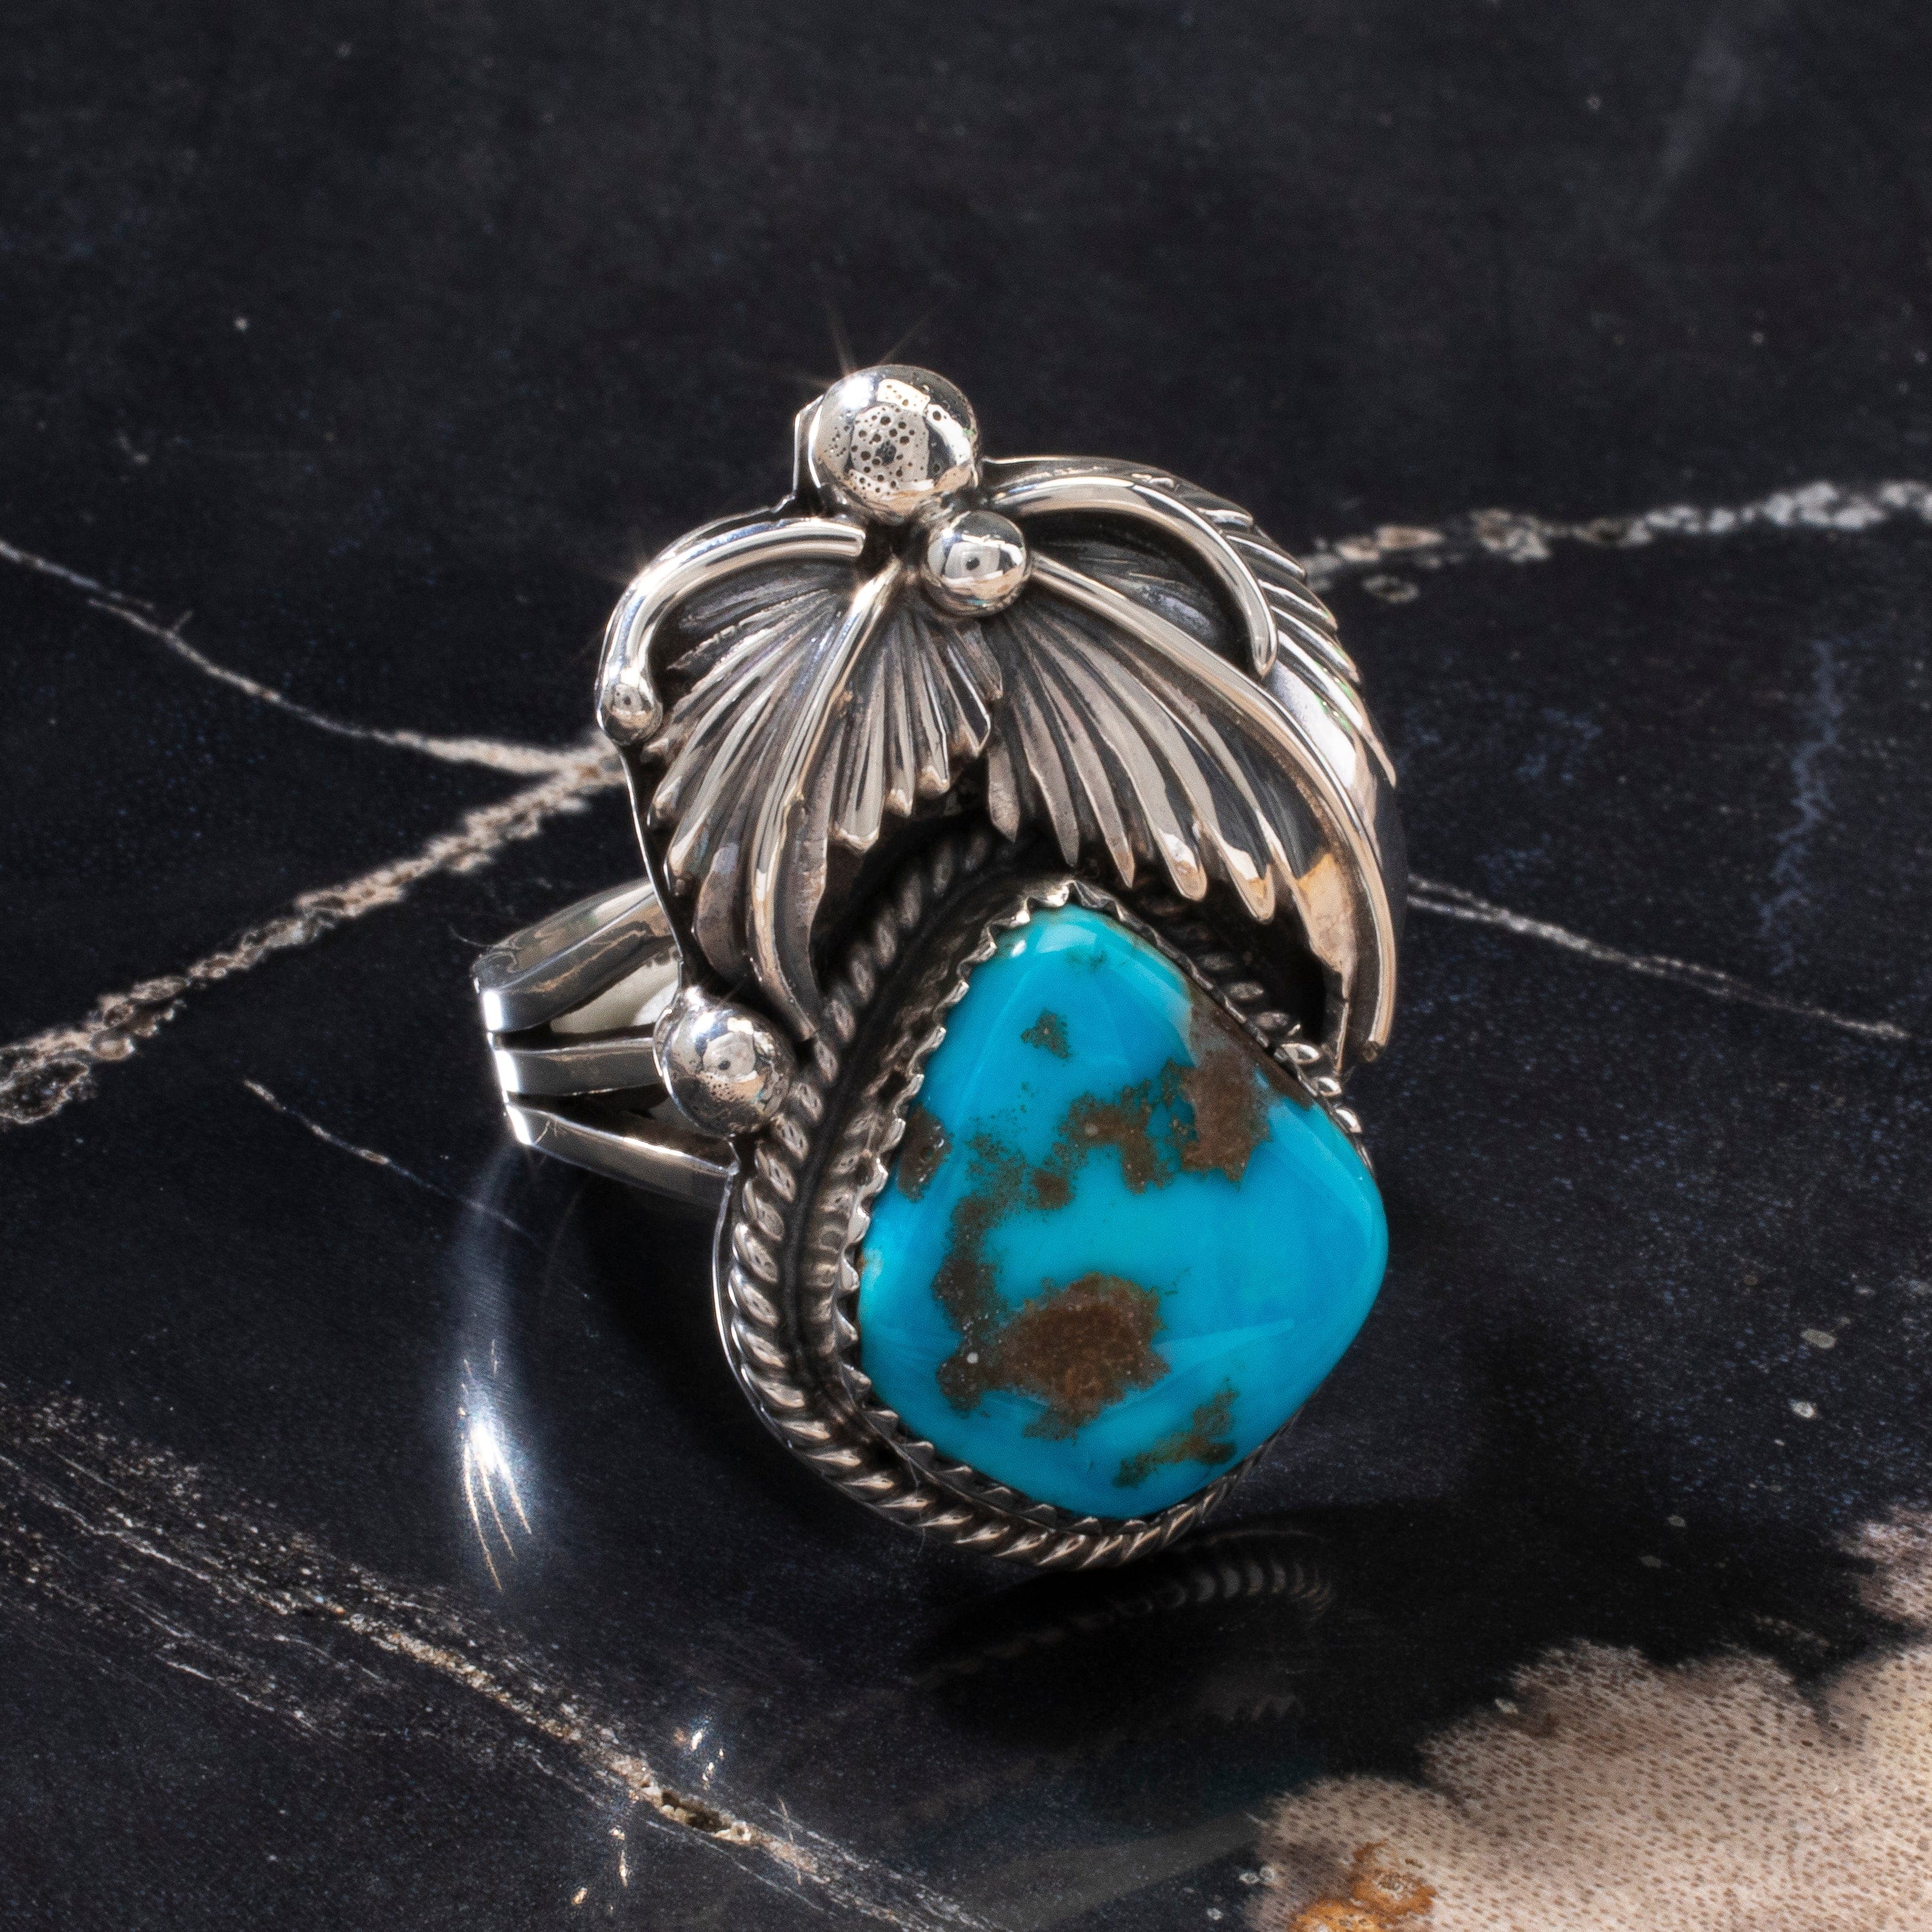 Kalifano Native American Jewelry 8 Joe Piaso Jr. Sleeping Beauty Turquoise Feather Navajo USA Native American Made 925 Sterling Silver Ring NAR700.042.8